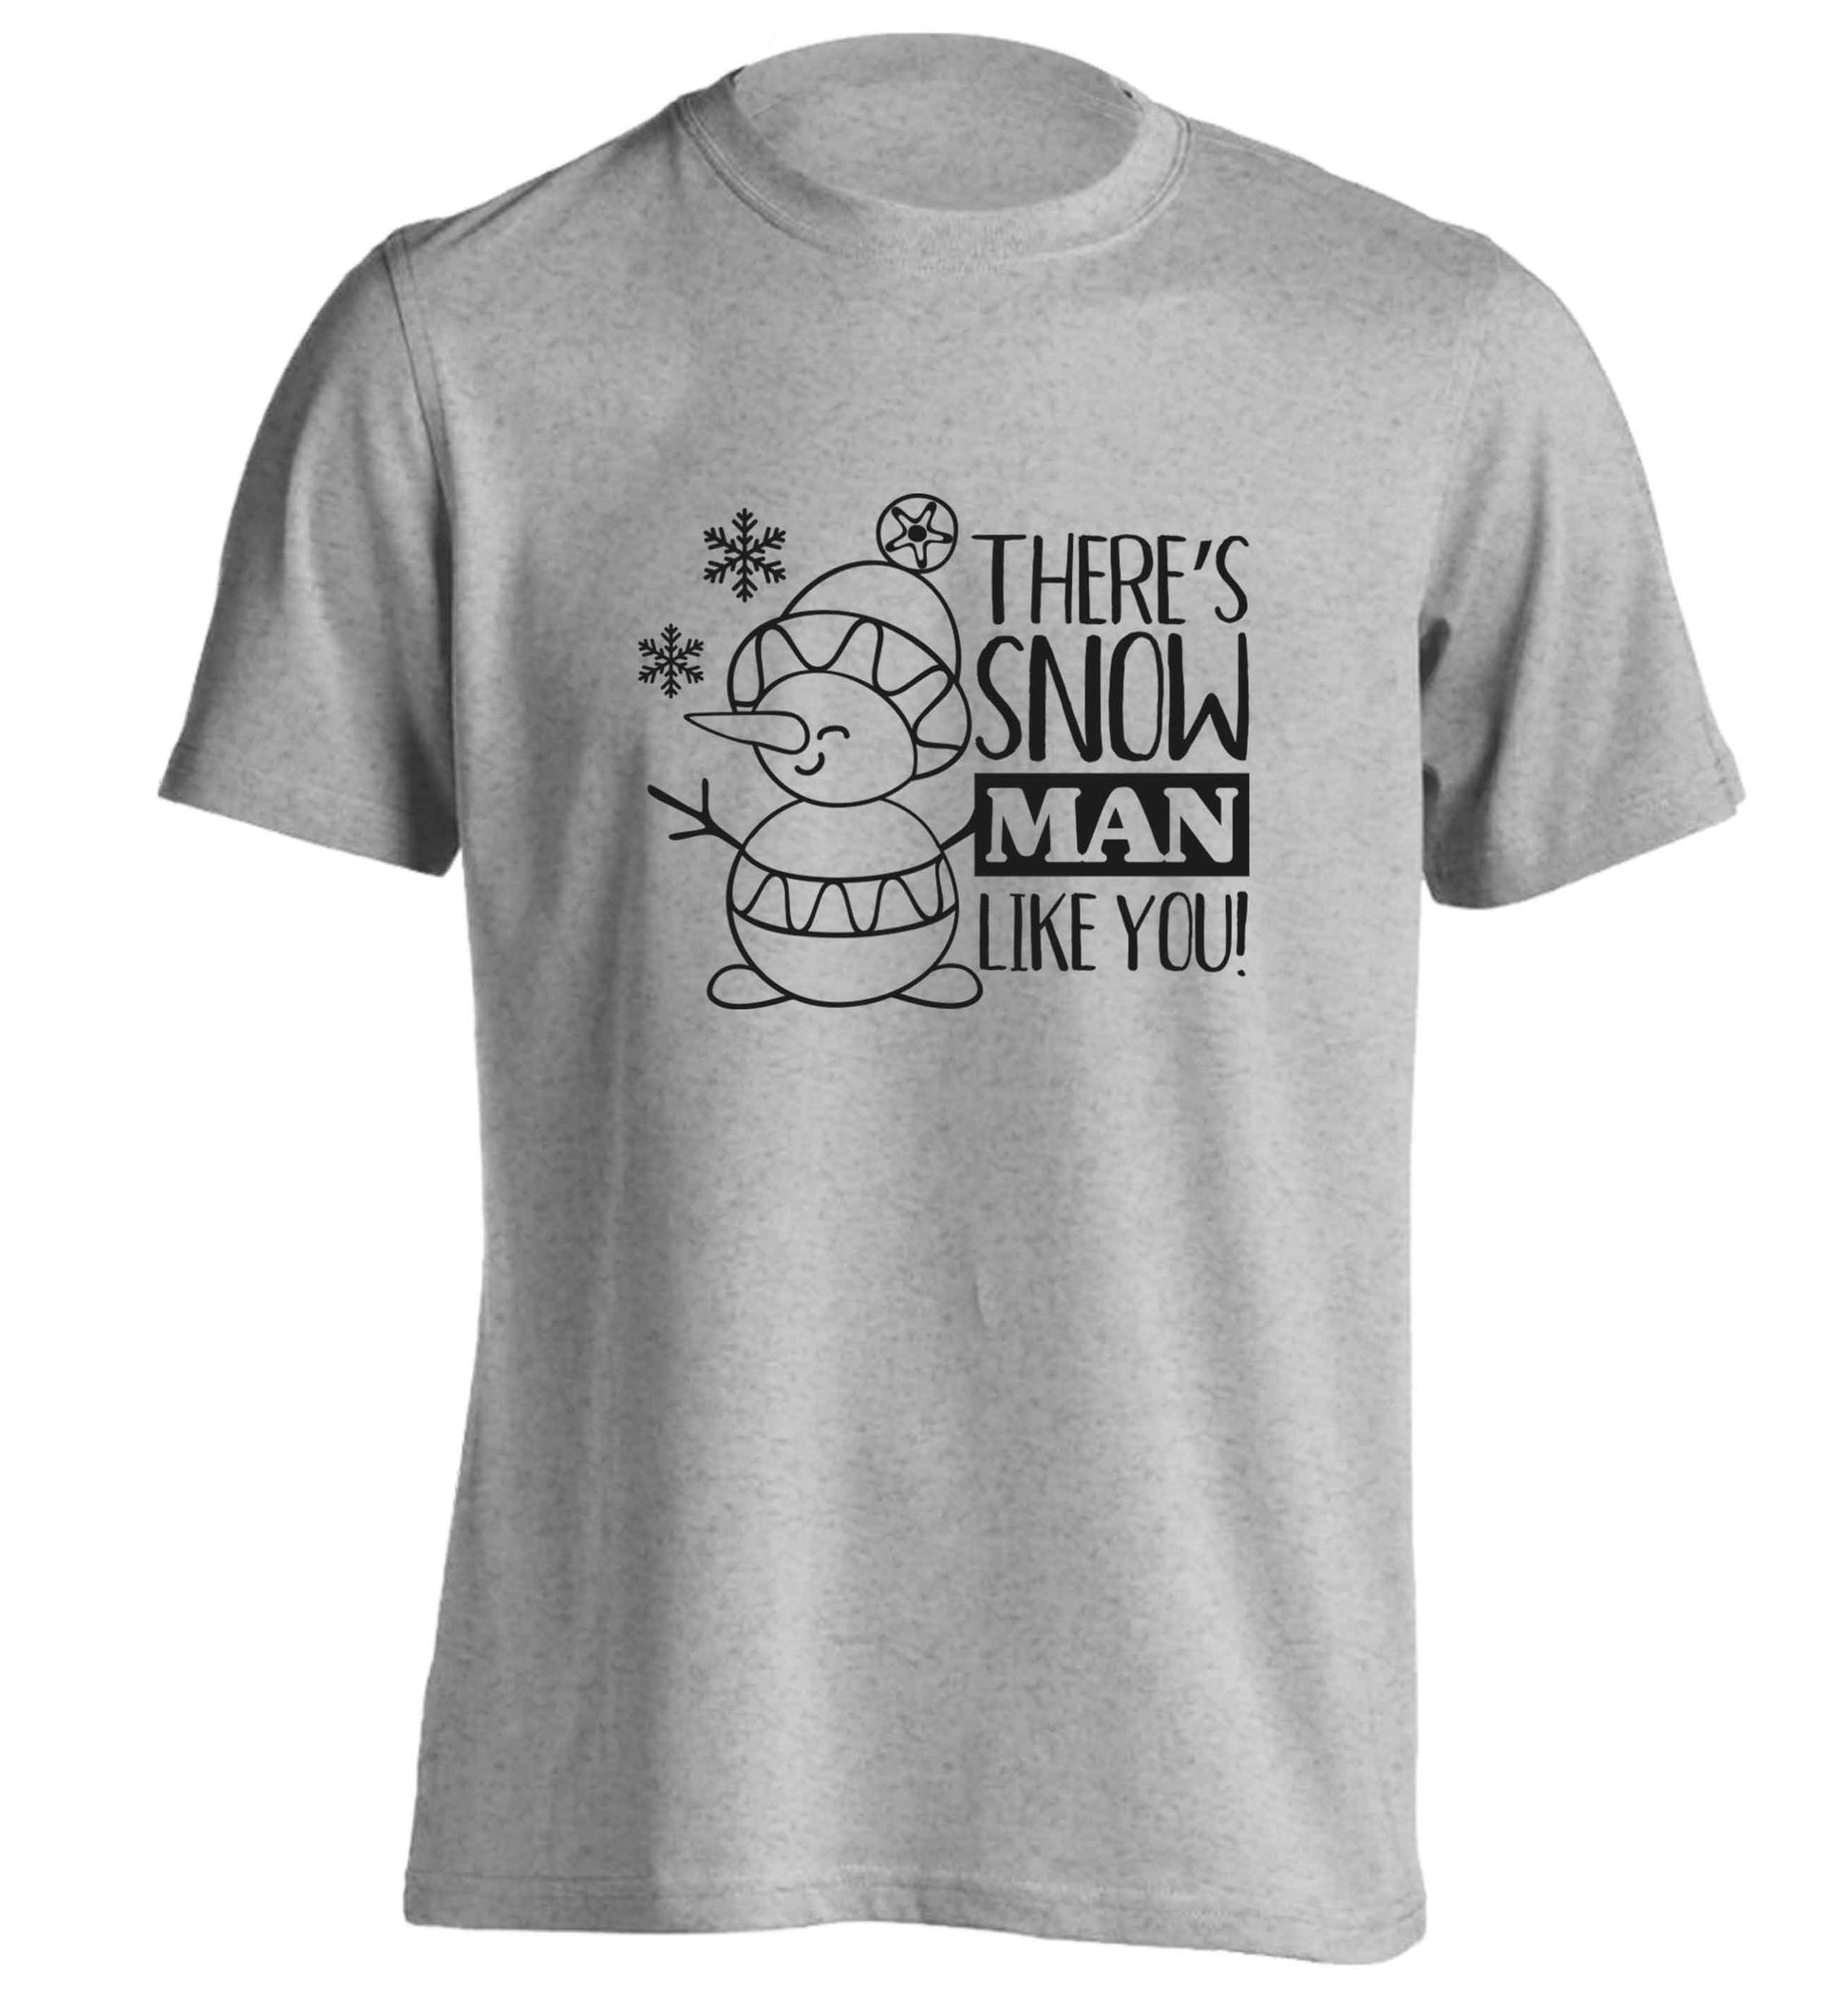 There's snow man like you adults unisex grey Tshirt 2XL